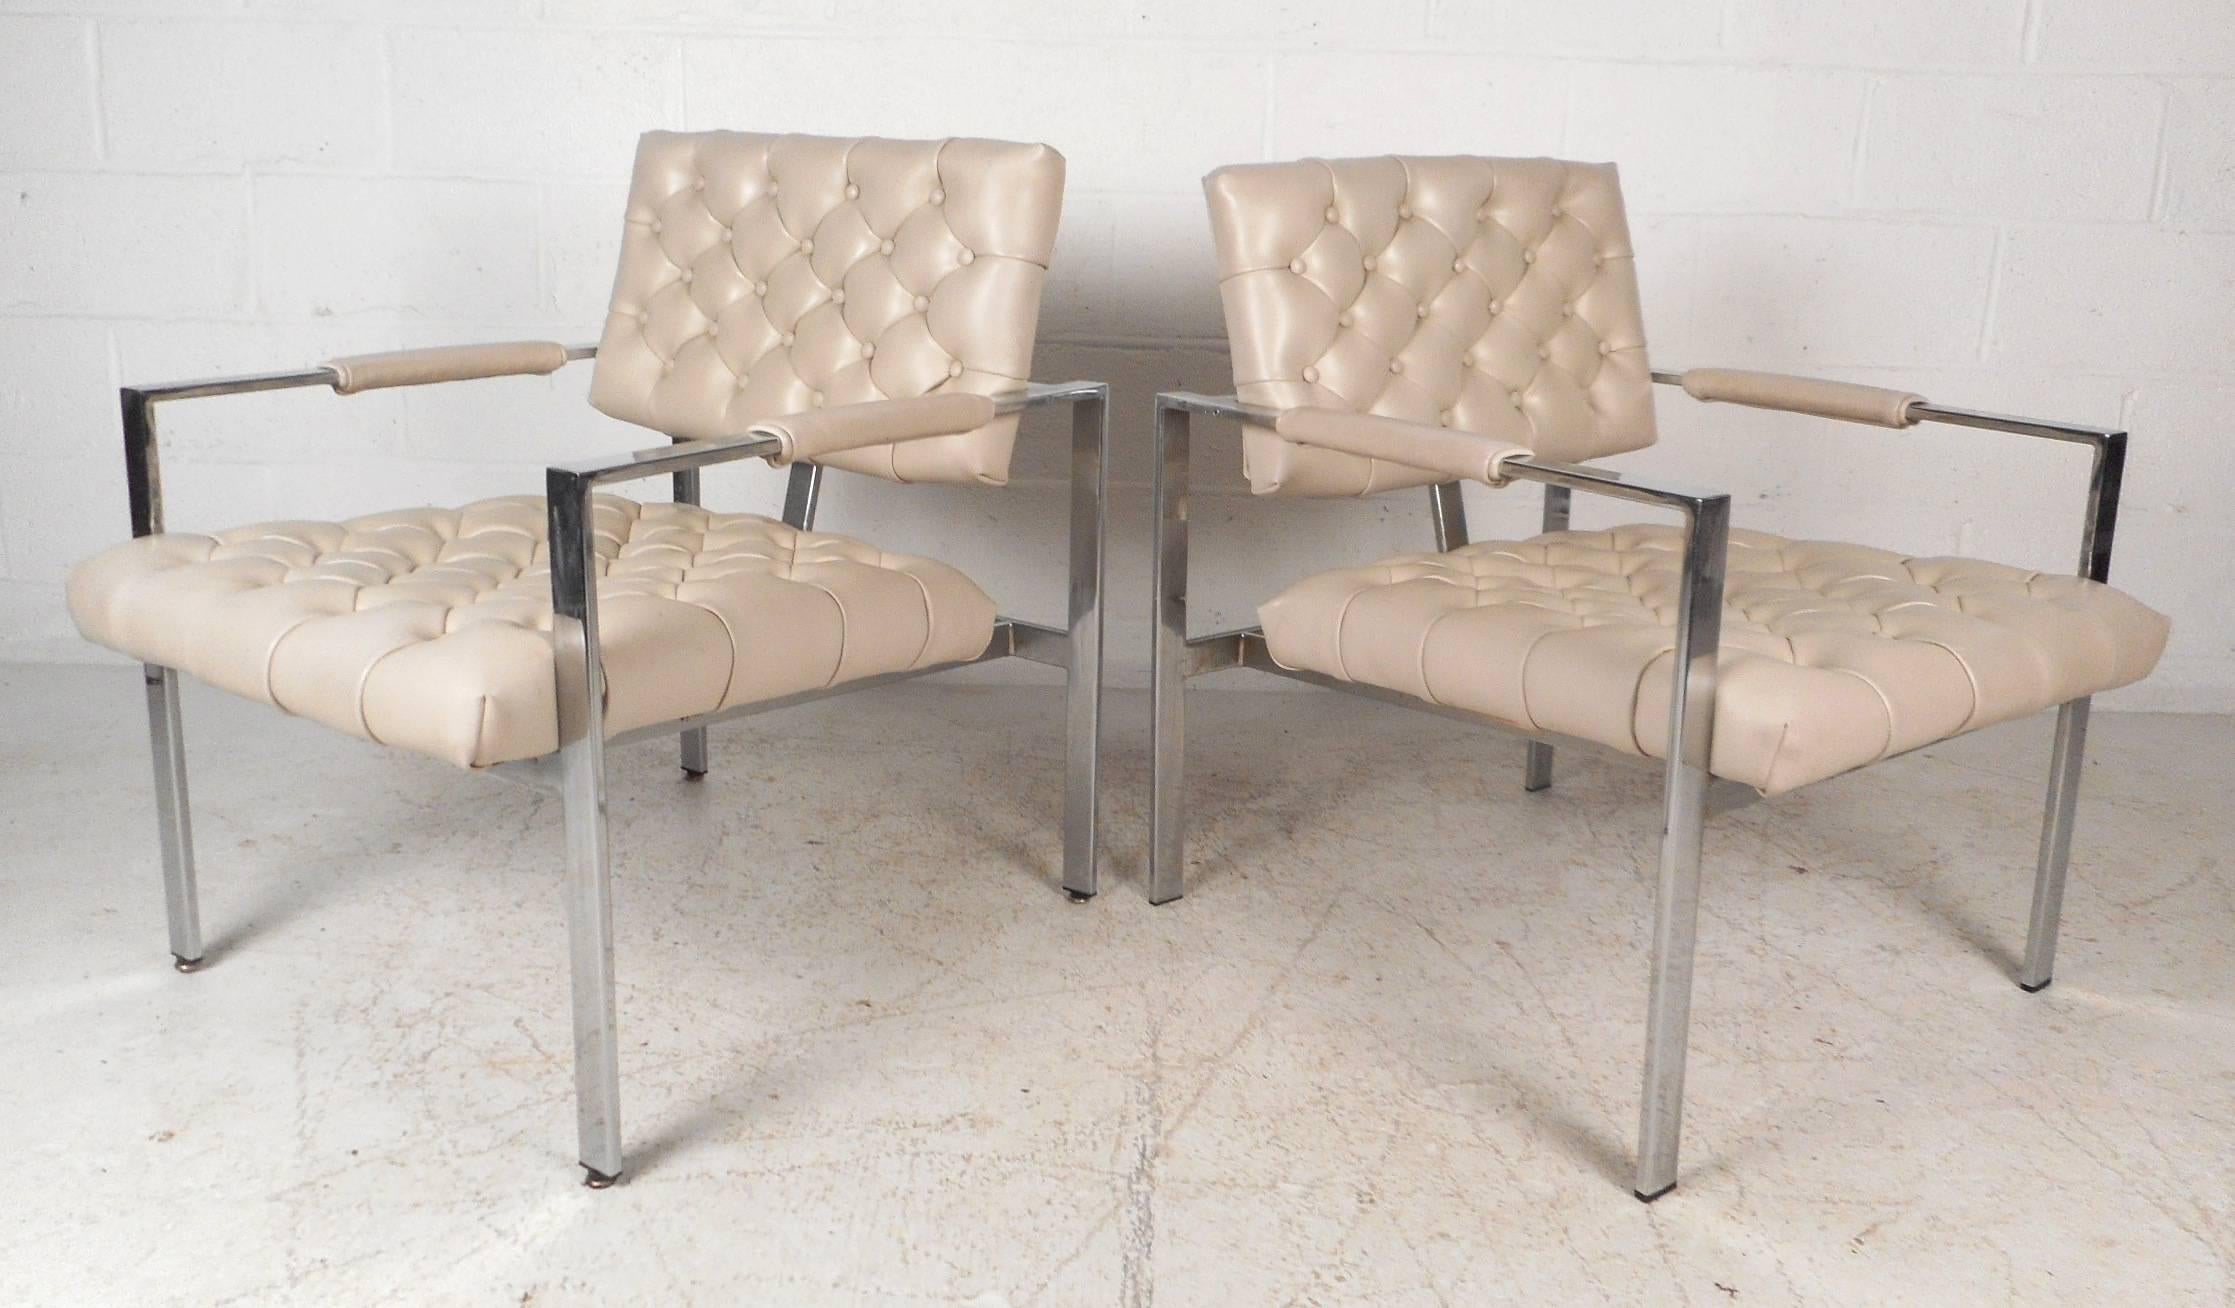 American Mid-Century Modern Vinyl Tufted Lounge Chairs by Milo Baughman for Thayer Coggin